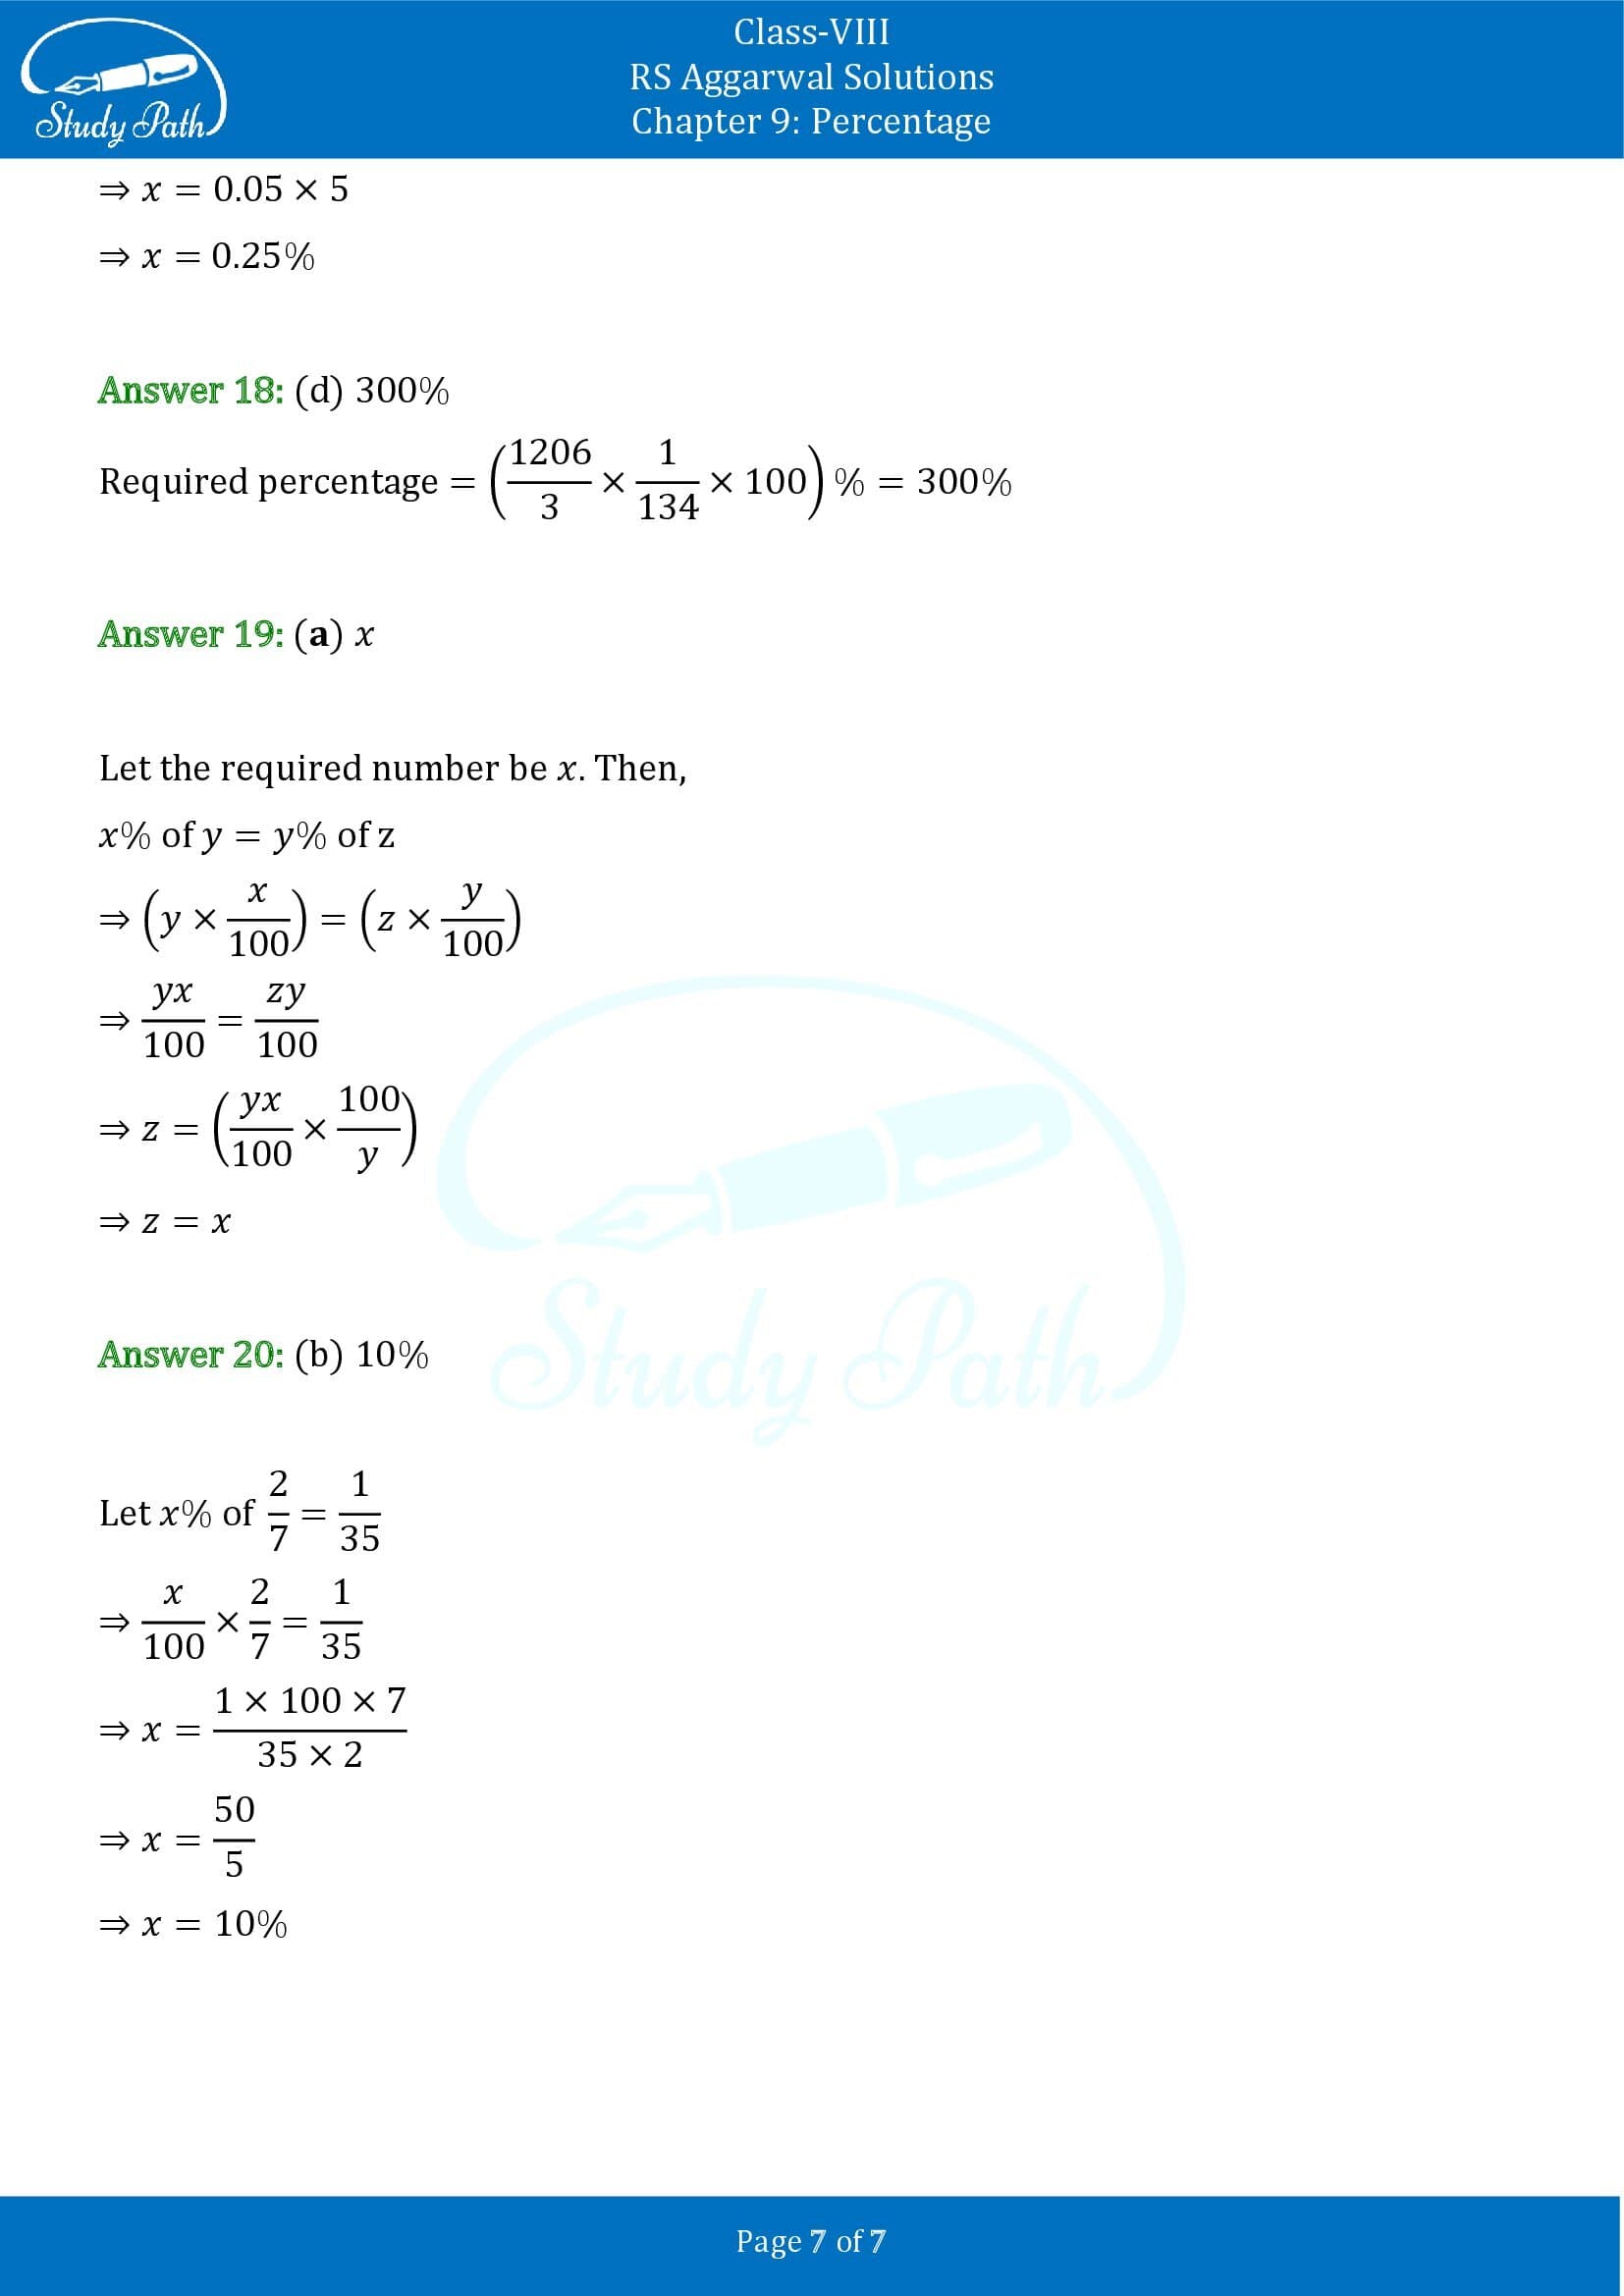 RS Aggarwal Solutions Class 8 Chapter 9 Percentage Exercise 9B MCQs 0007